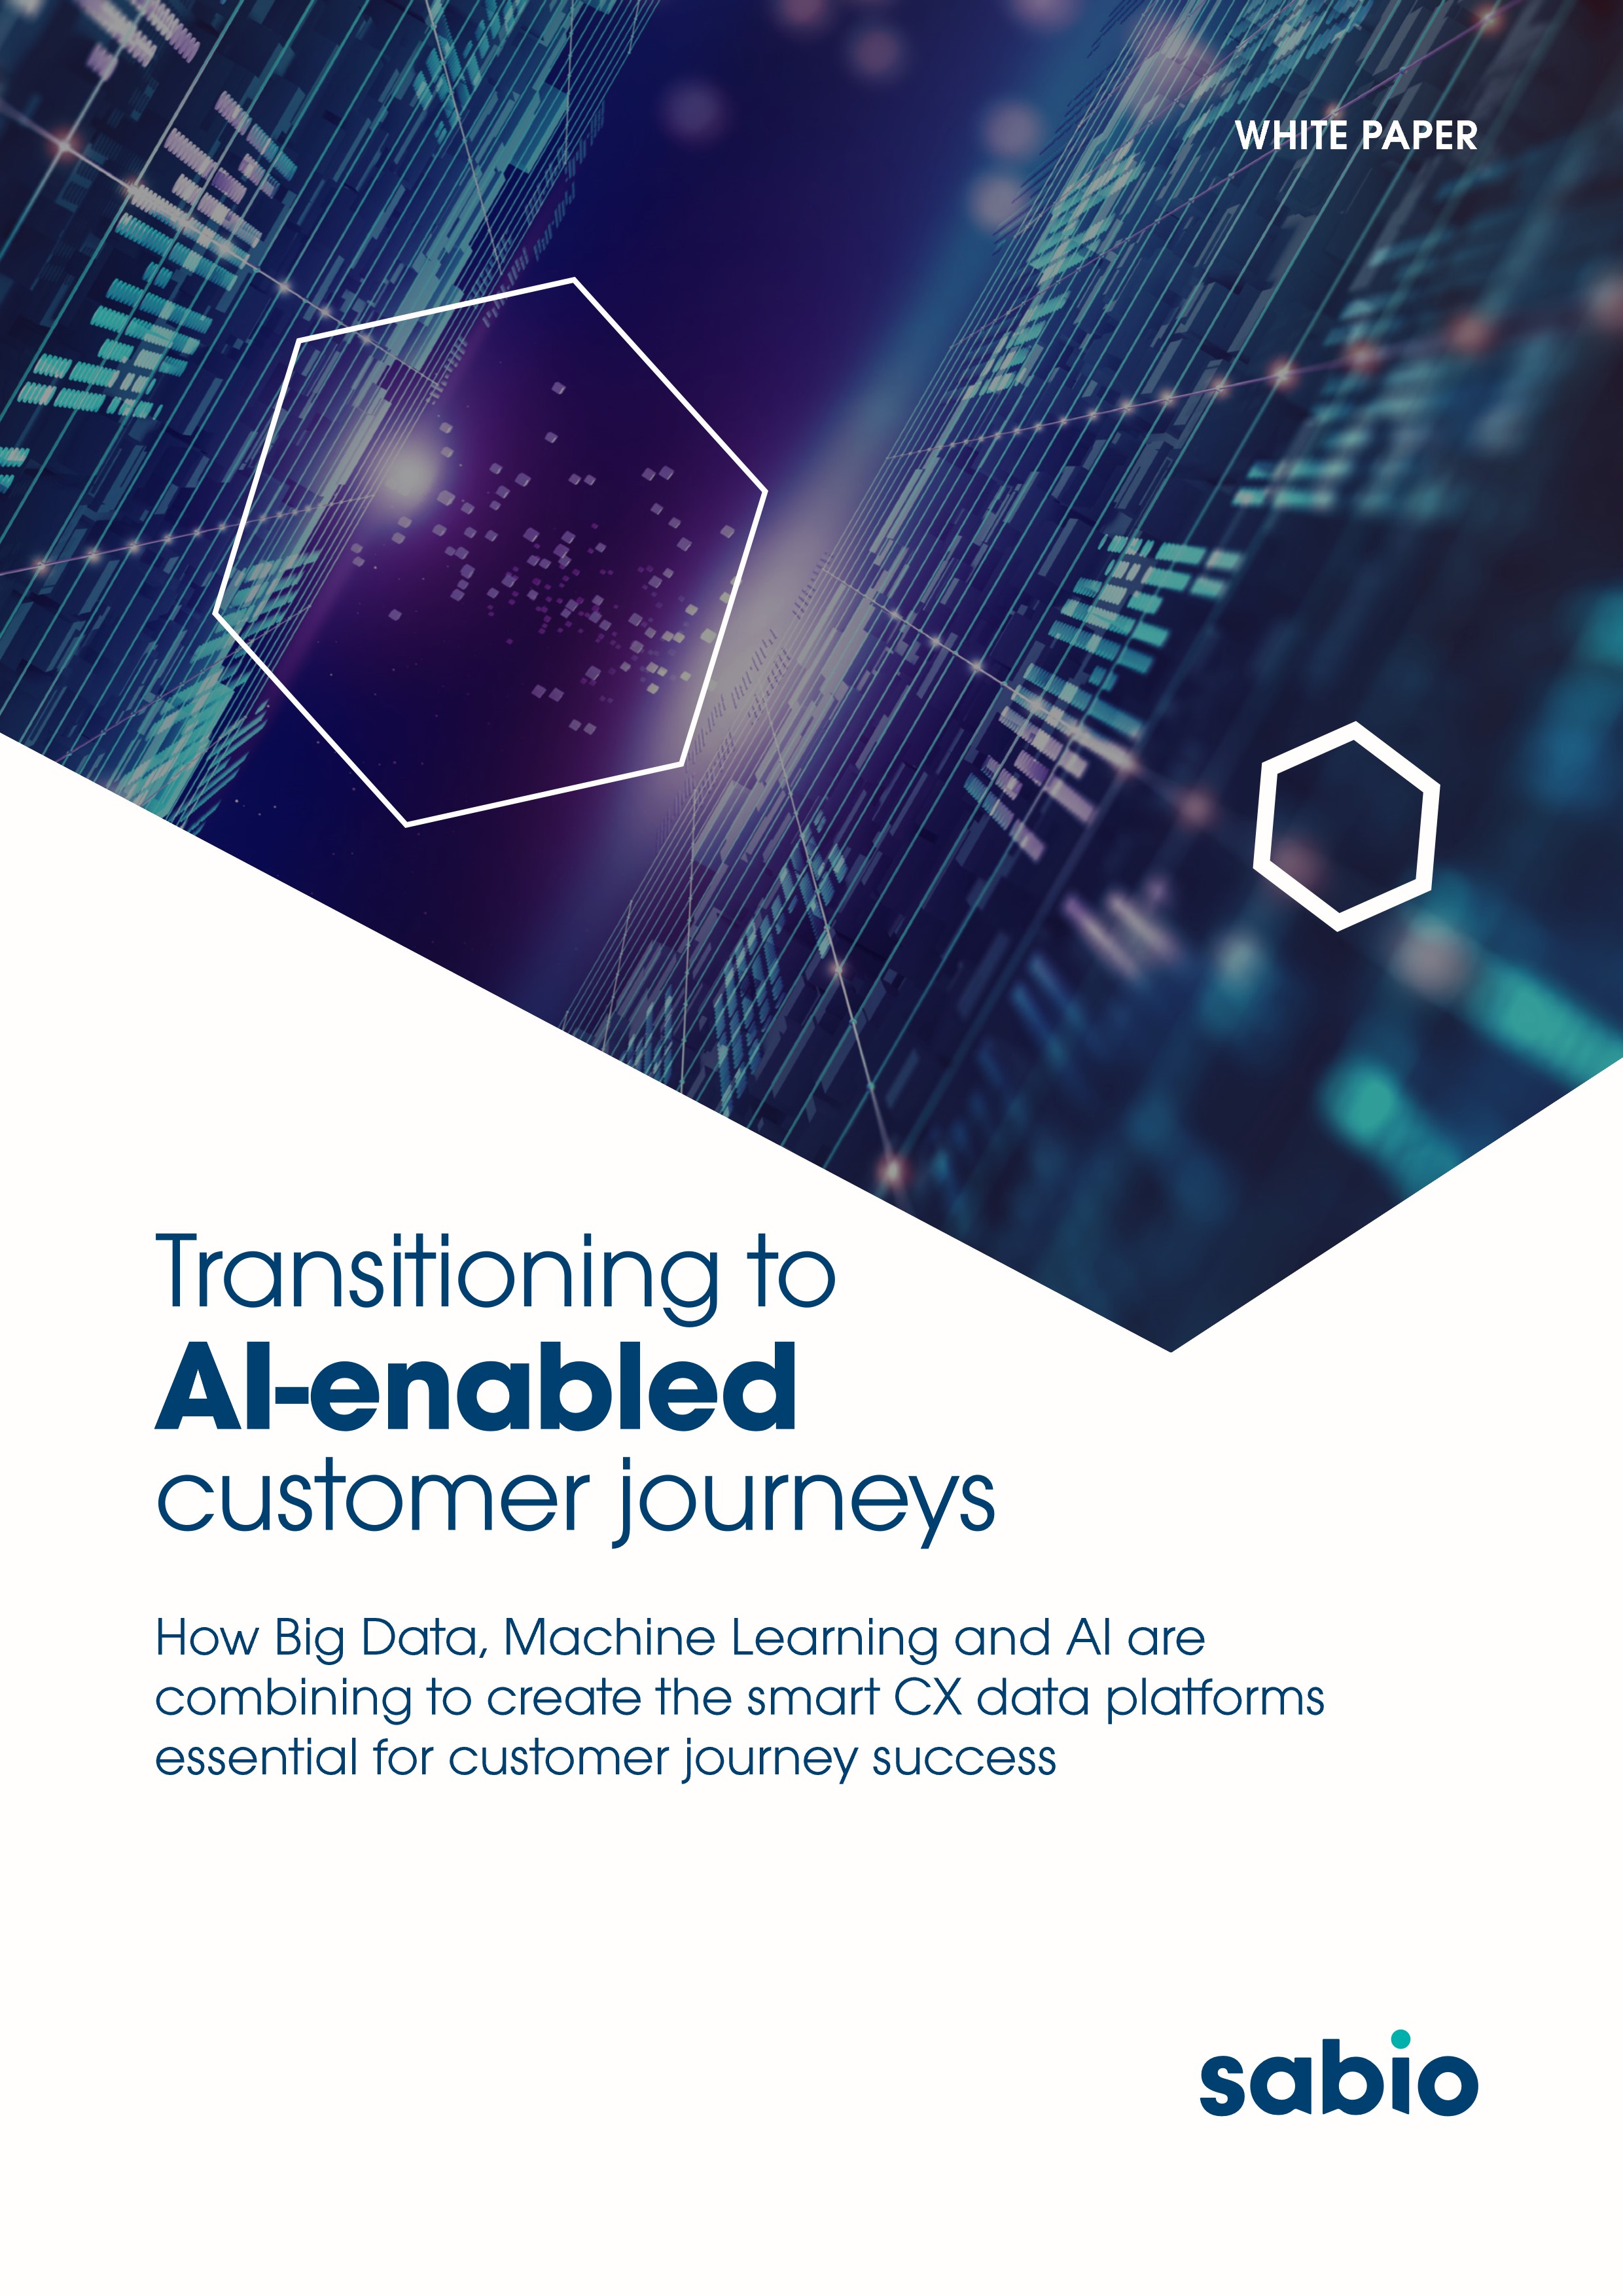 Transitioning to AI-enabled customer journeys